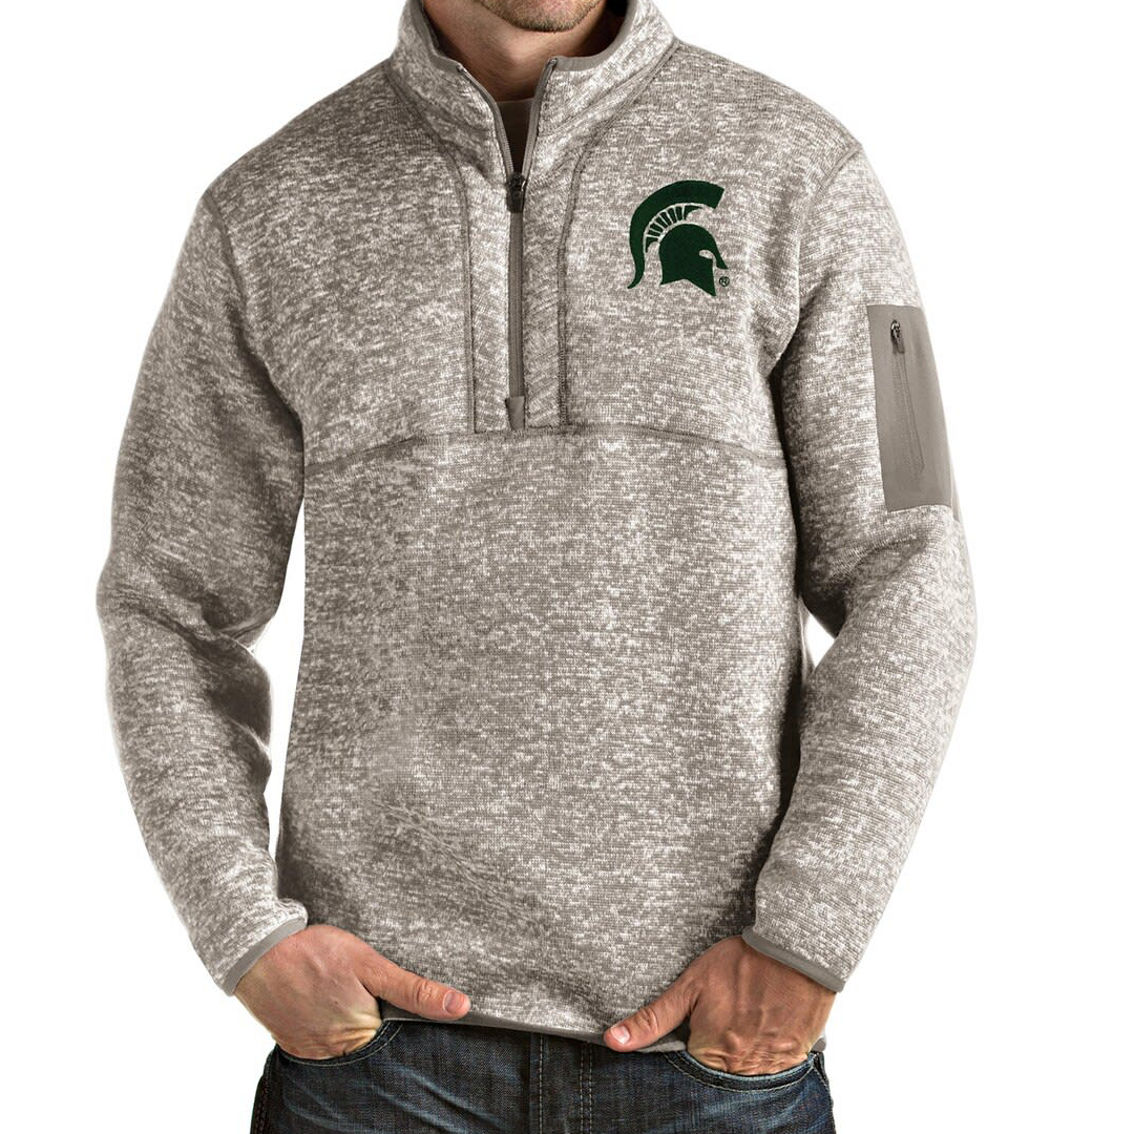 Antigua Men's Oatmeal Michigan State Spartans Fortune Half-Zip Pullover Jacket - Image 2 of 2